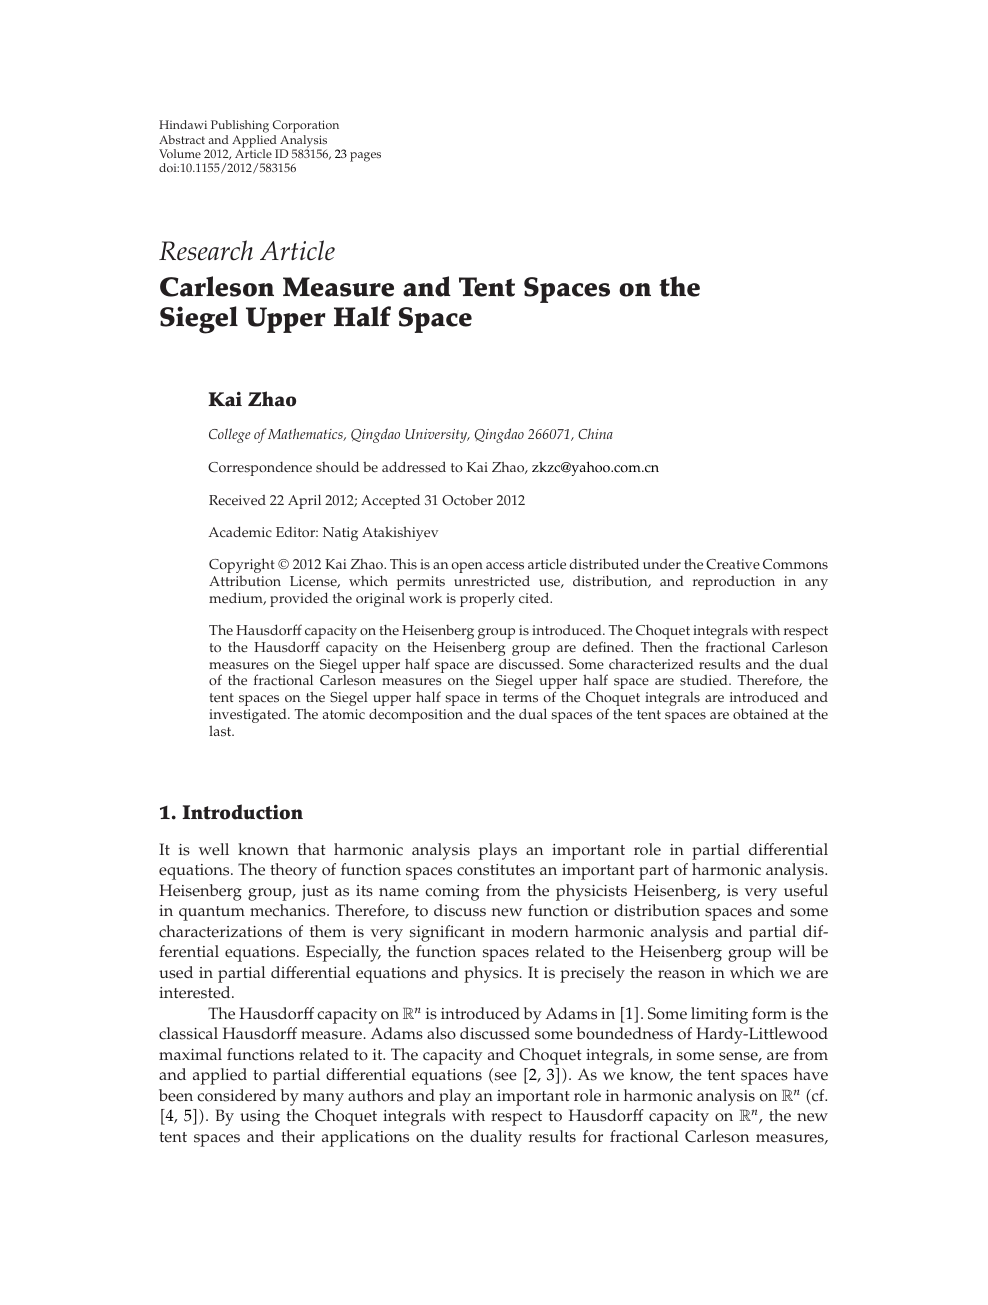 Carleson Measure And Tent Spaces On The Siegel Upper Half Space Topic Of Research Paper In Mathematics Download Scholarly Article Pdf And Read For Free On Cyberleninka Open Science Hub